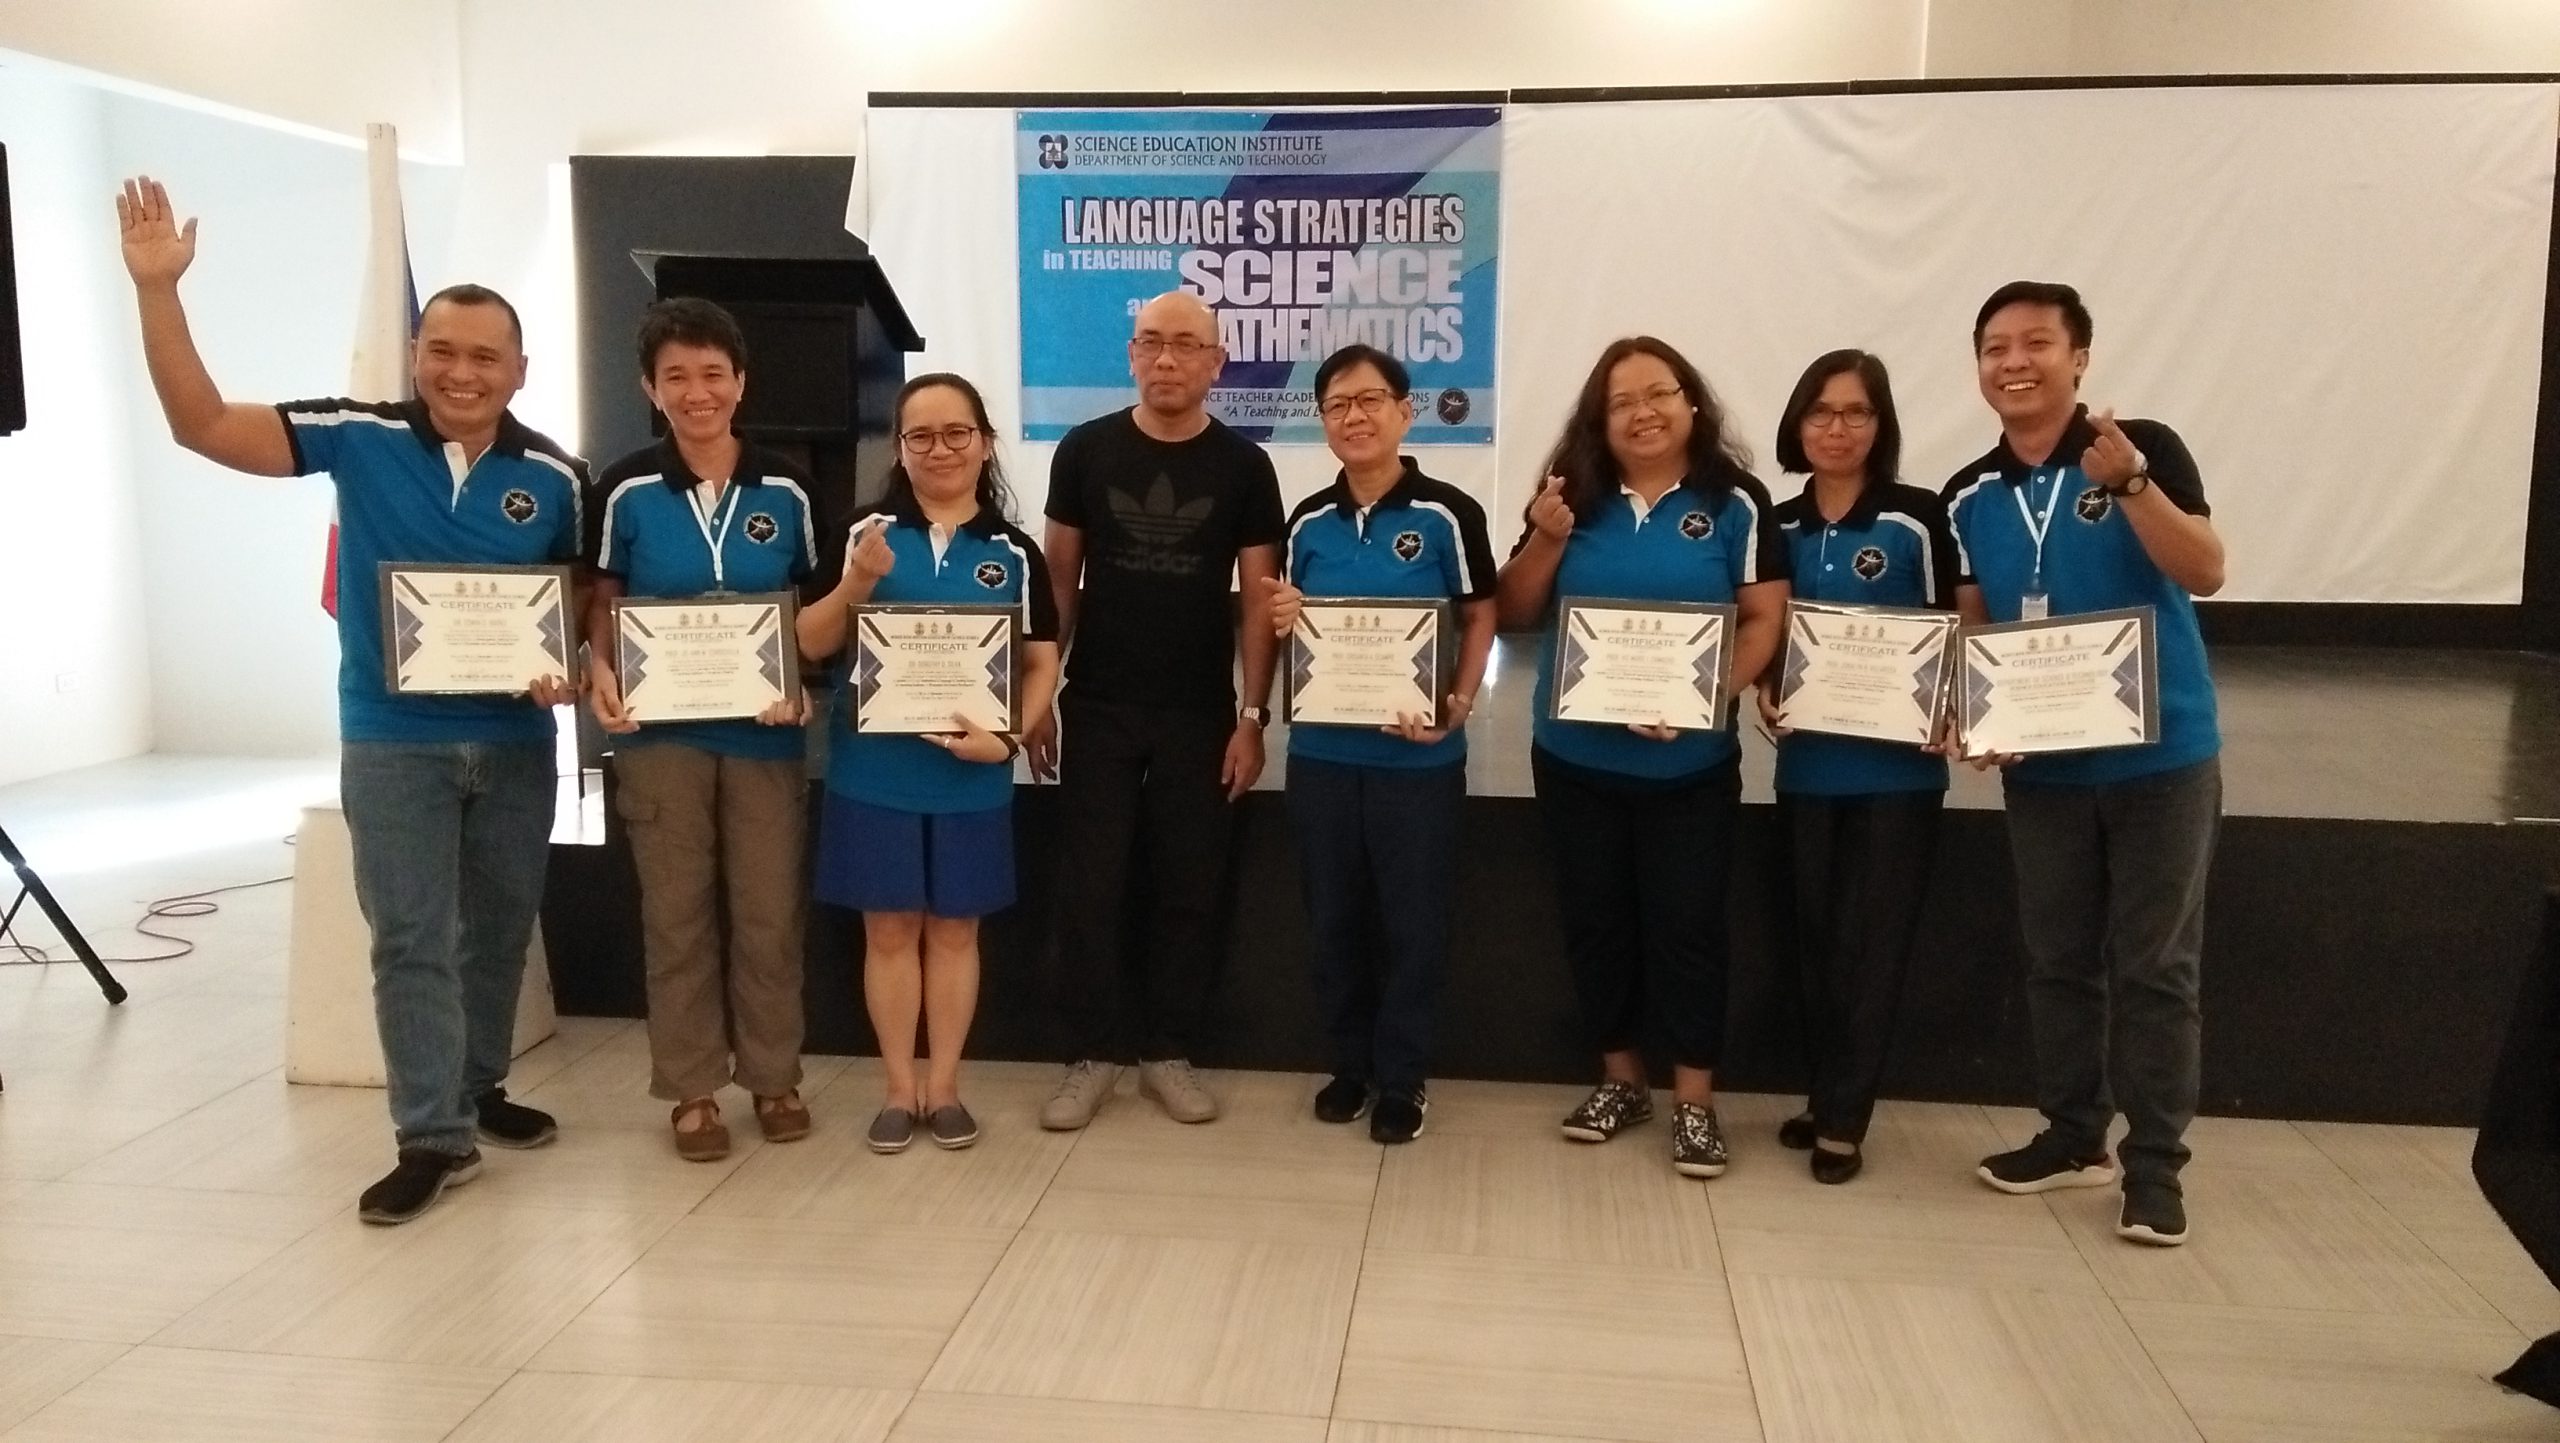 DOST-SEI Language Strategies in Teaching Science and Mathematics Goes to Bacolod City